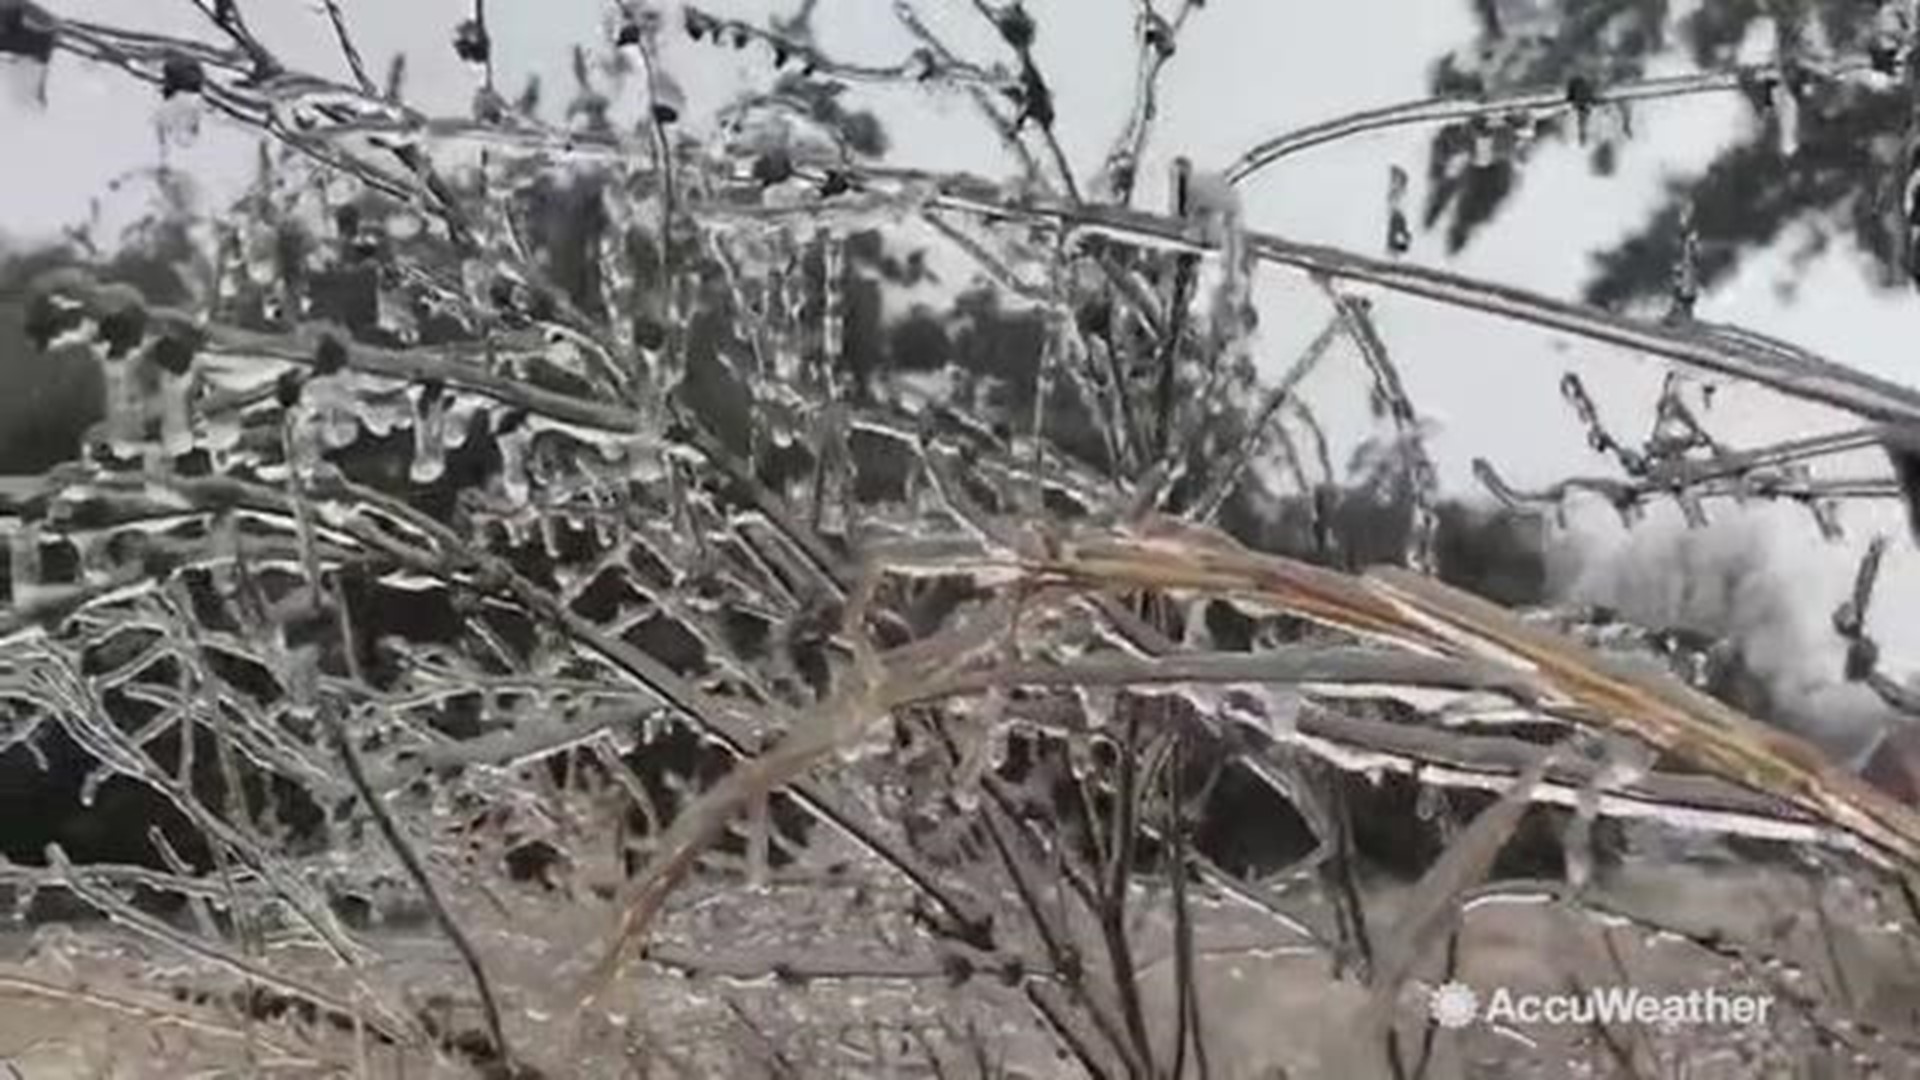 This beautiful sight just outside of Danville, Virginia shows ice covering plants and the branches of trees on Jan. 13.  It is also very dangerous because the trees are getting bent by the weight of the ice, which could be hazardous to power lines and cau